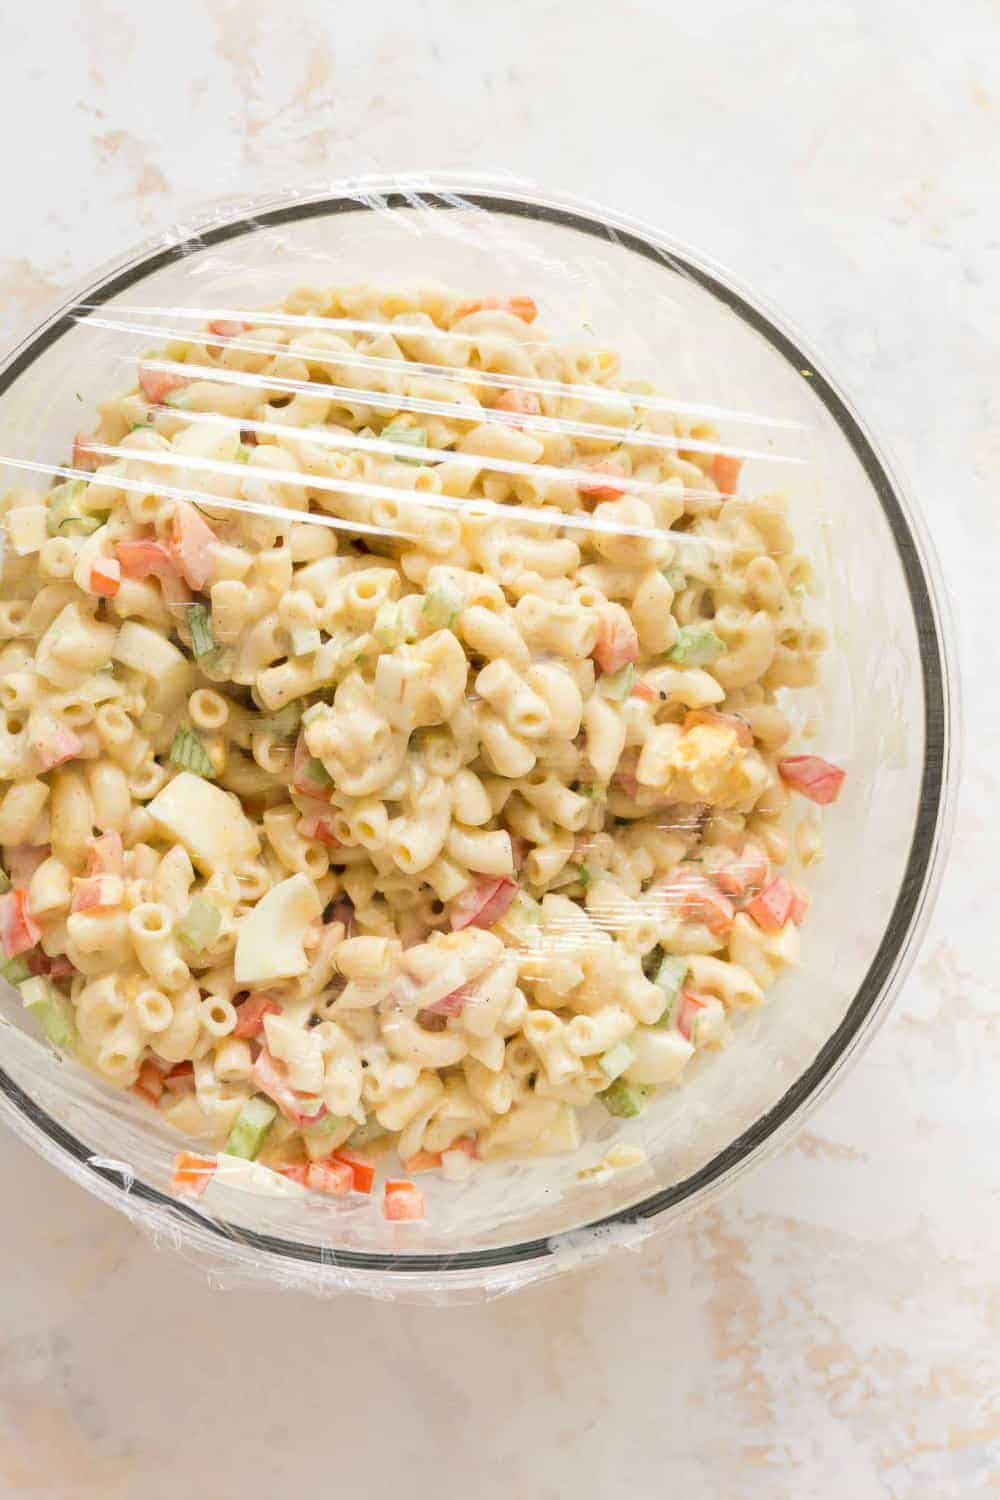 Macaroni salad in a glass bowl, covered with plastic wrap